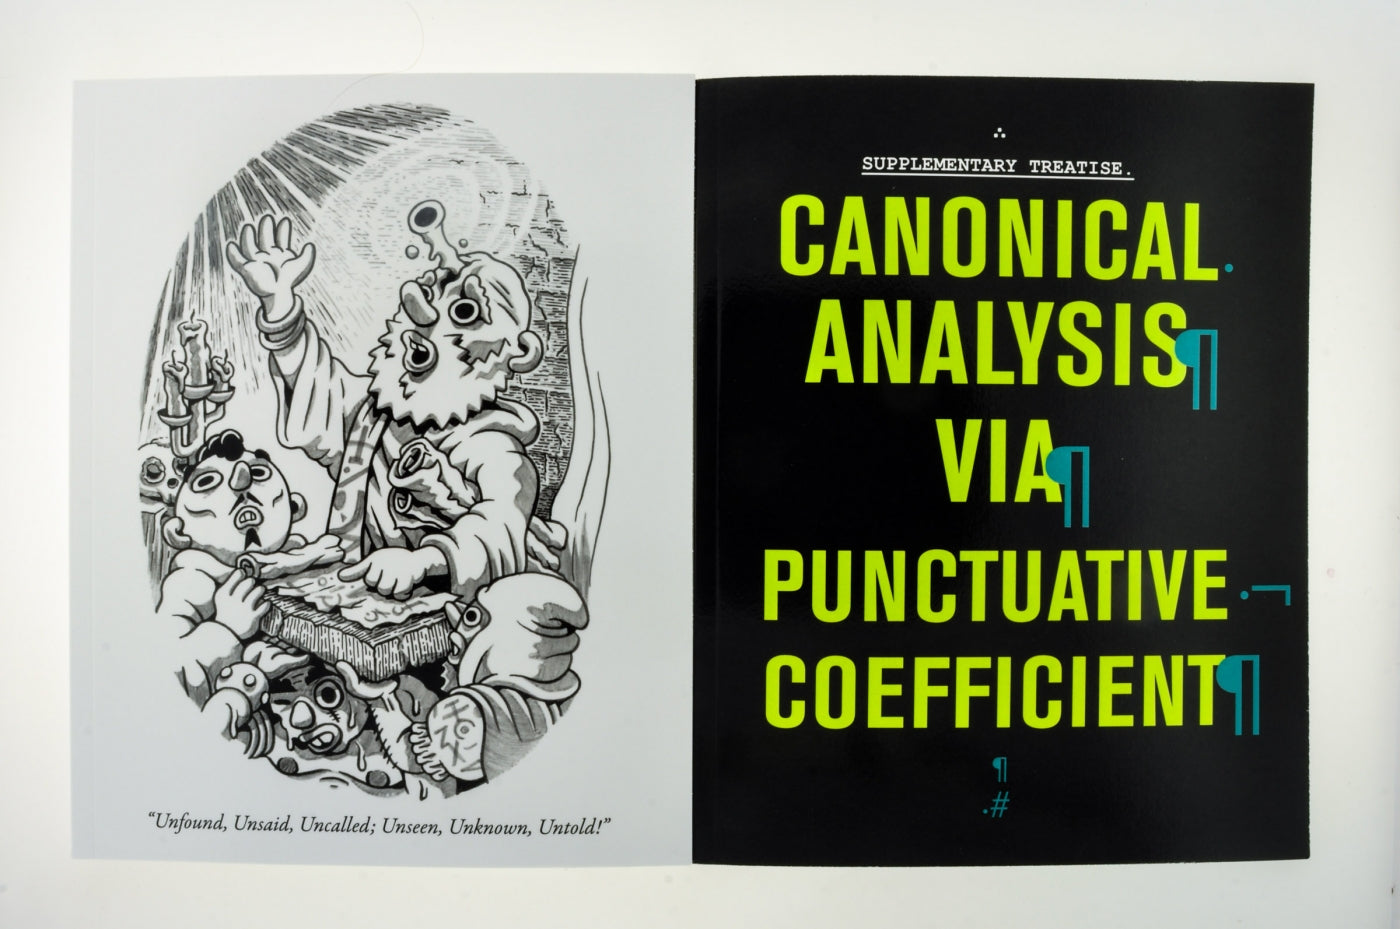 Supplementary Treatise: Canonical Analysis via Punctuative Coefficient